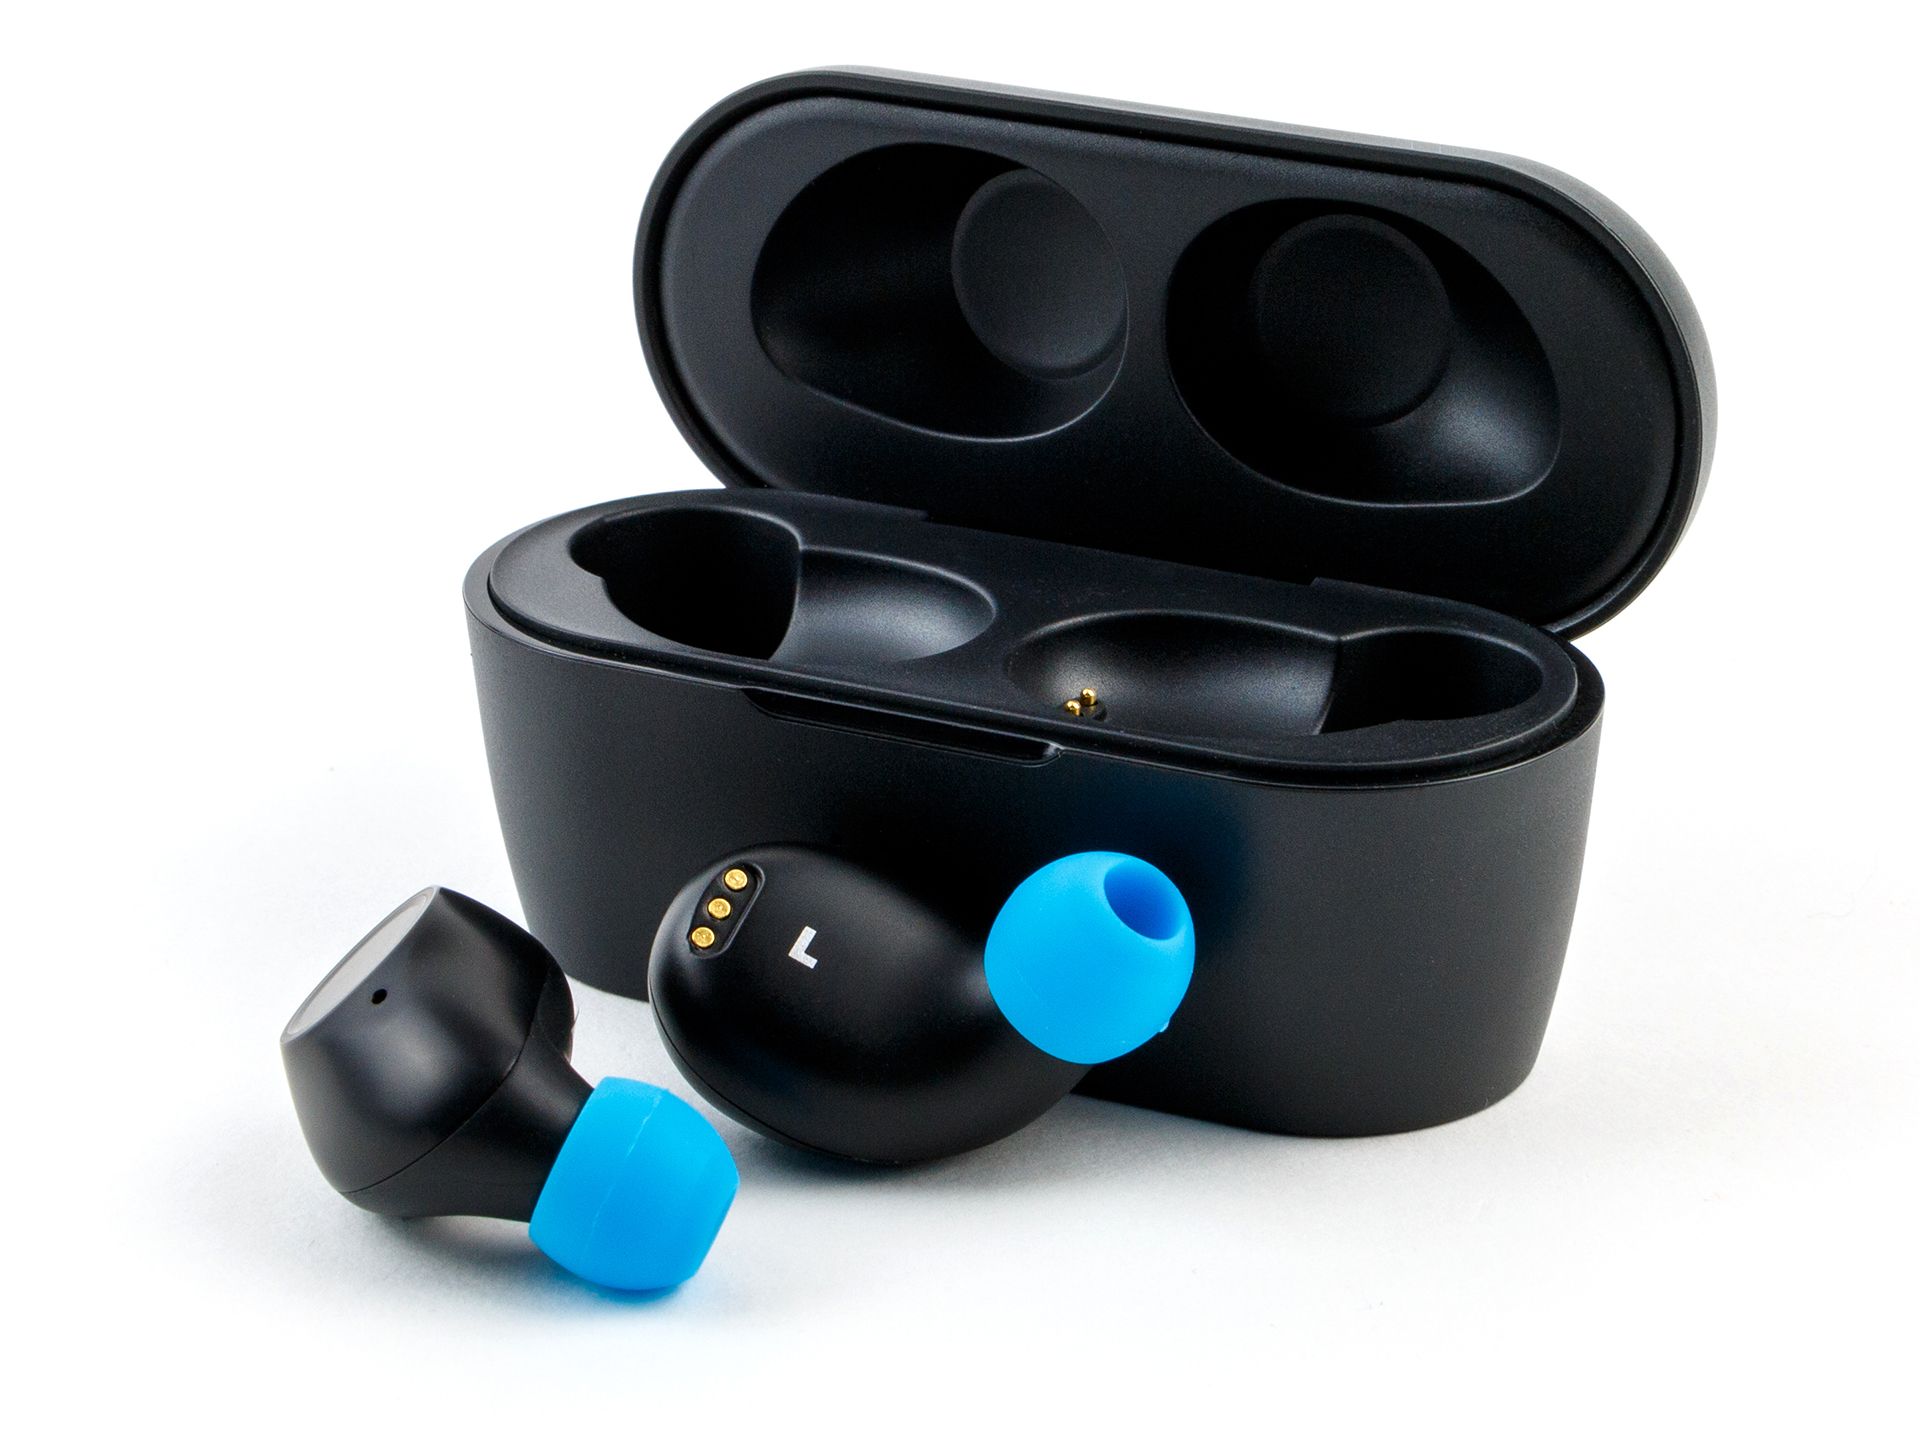 Blaupunkt Wireless Earphones With Charging Case BLACK AND WHITE